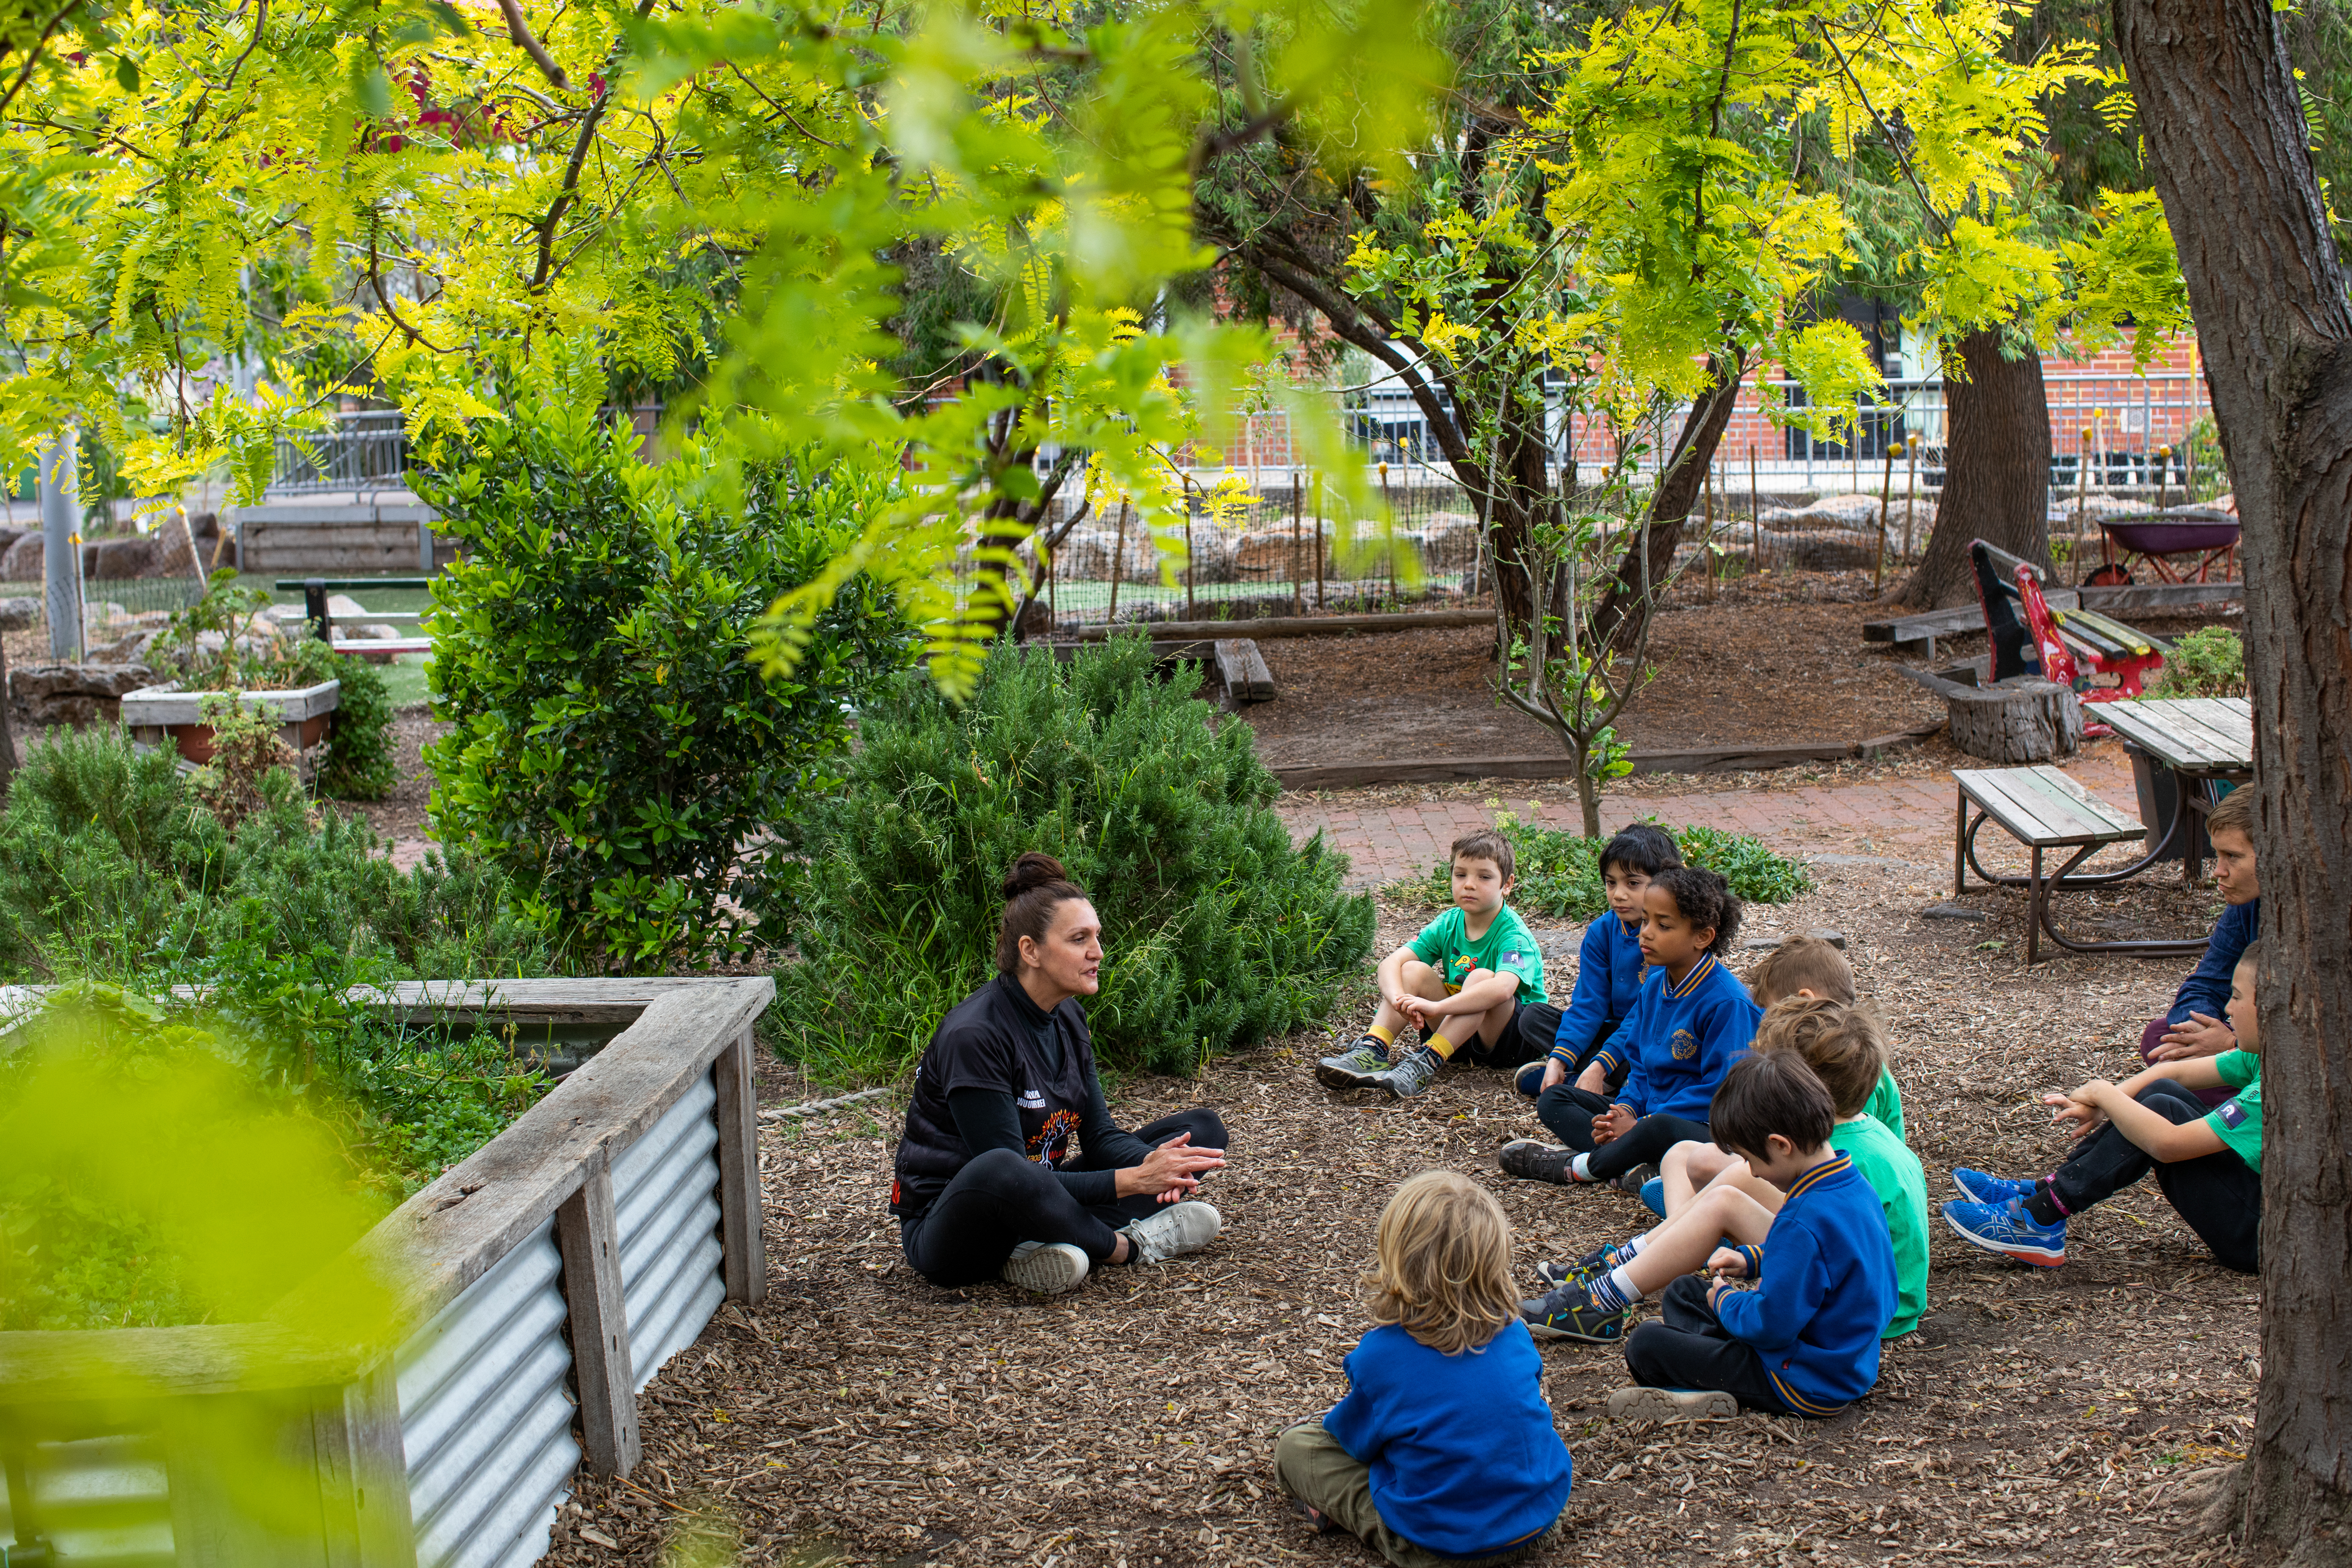 An educator sitting in a garden with young children